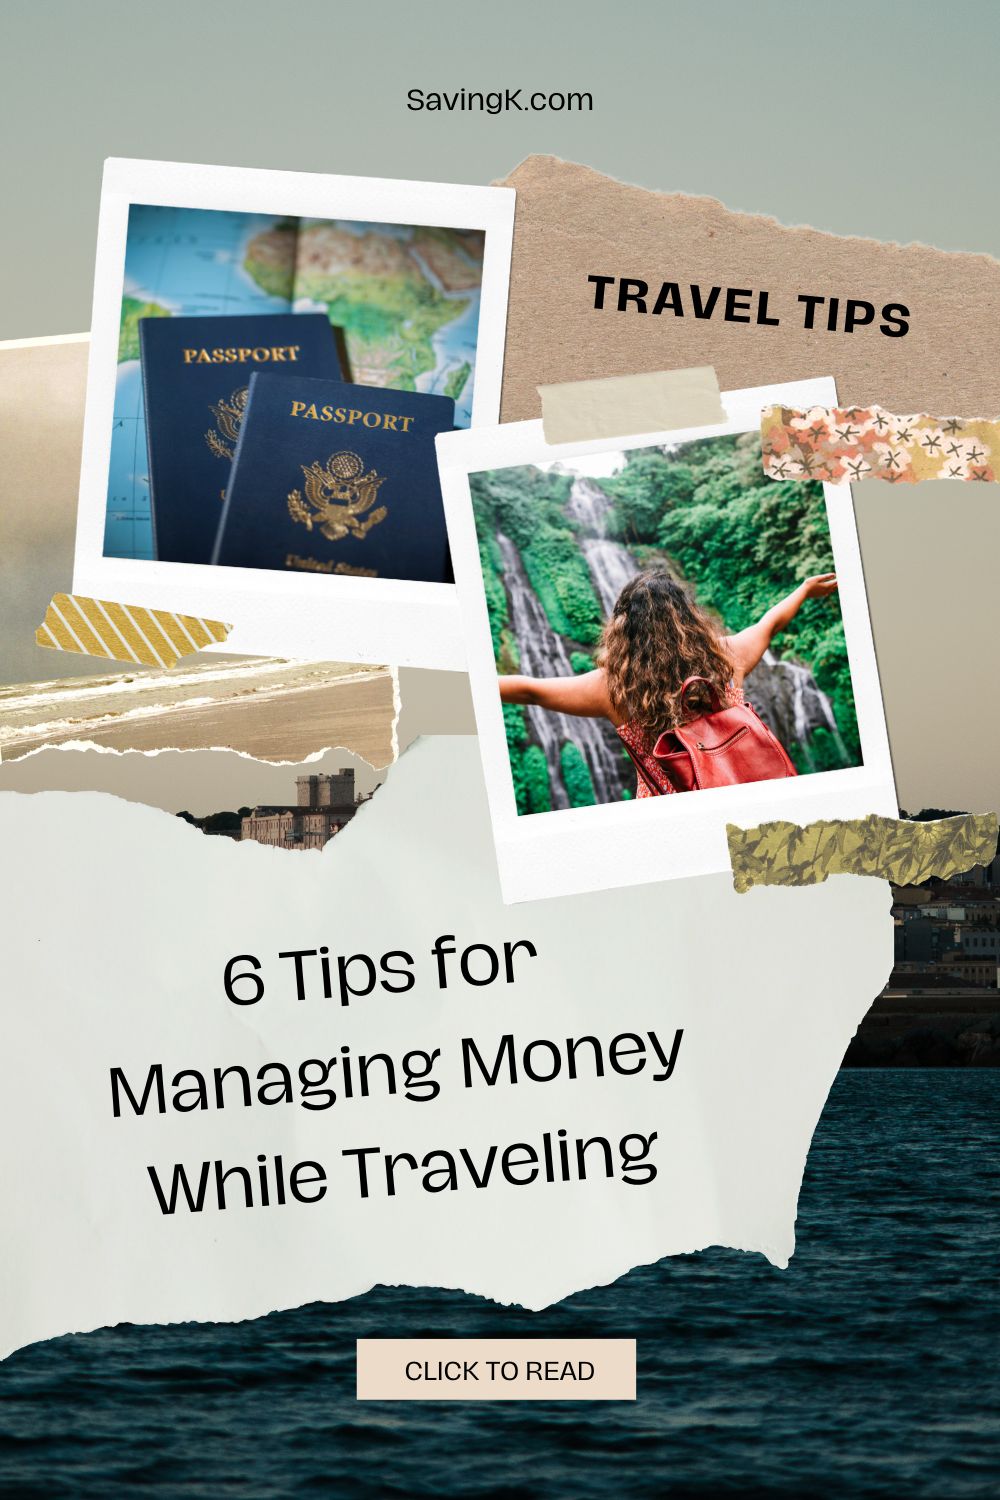 6 Tips for Managing Money While Traveling